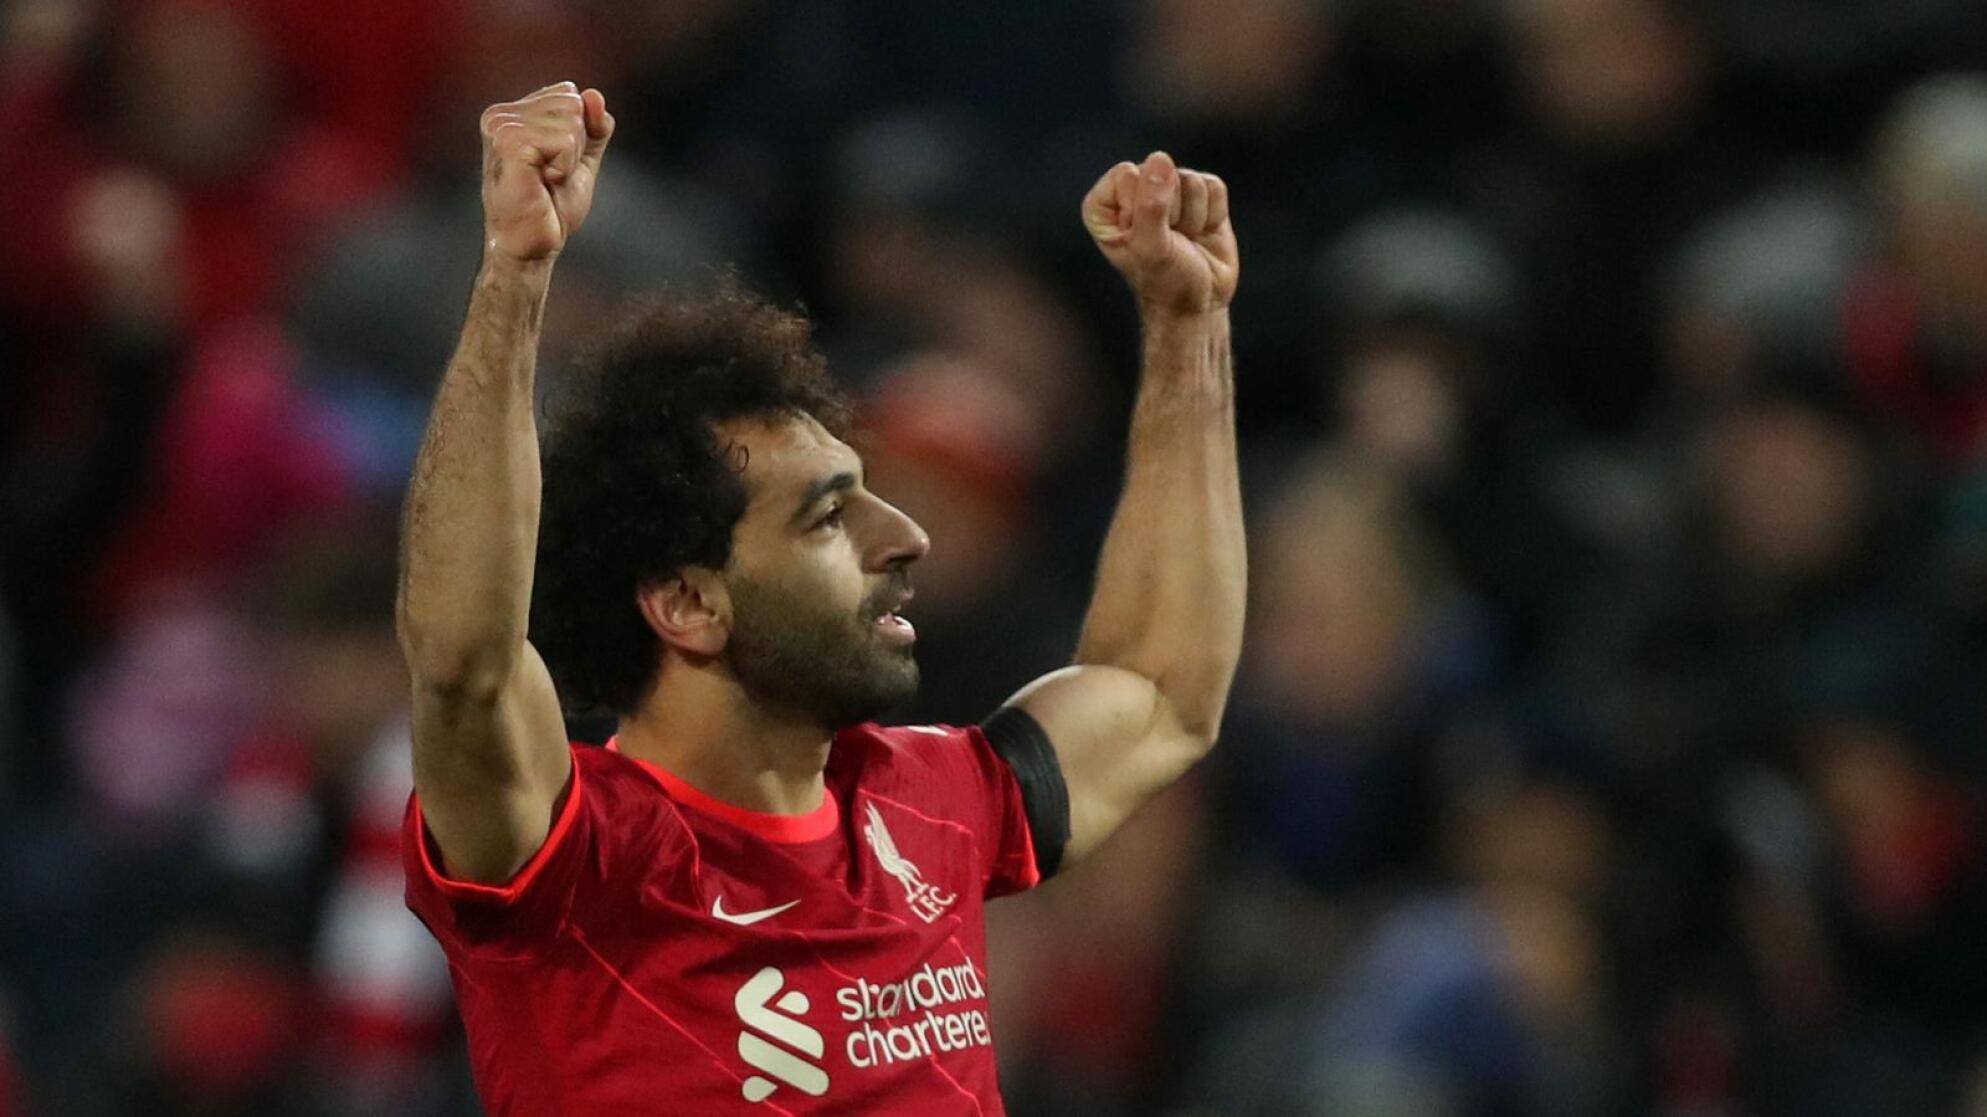 Liverpool's Mohamed Salah celebrates after scoring during their Premier League game against Aston Villa at Anfield in Liverpool on Saturday